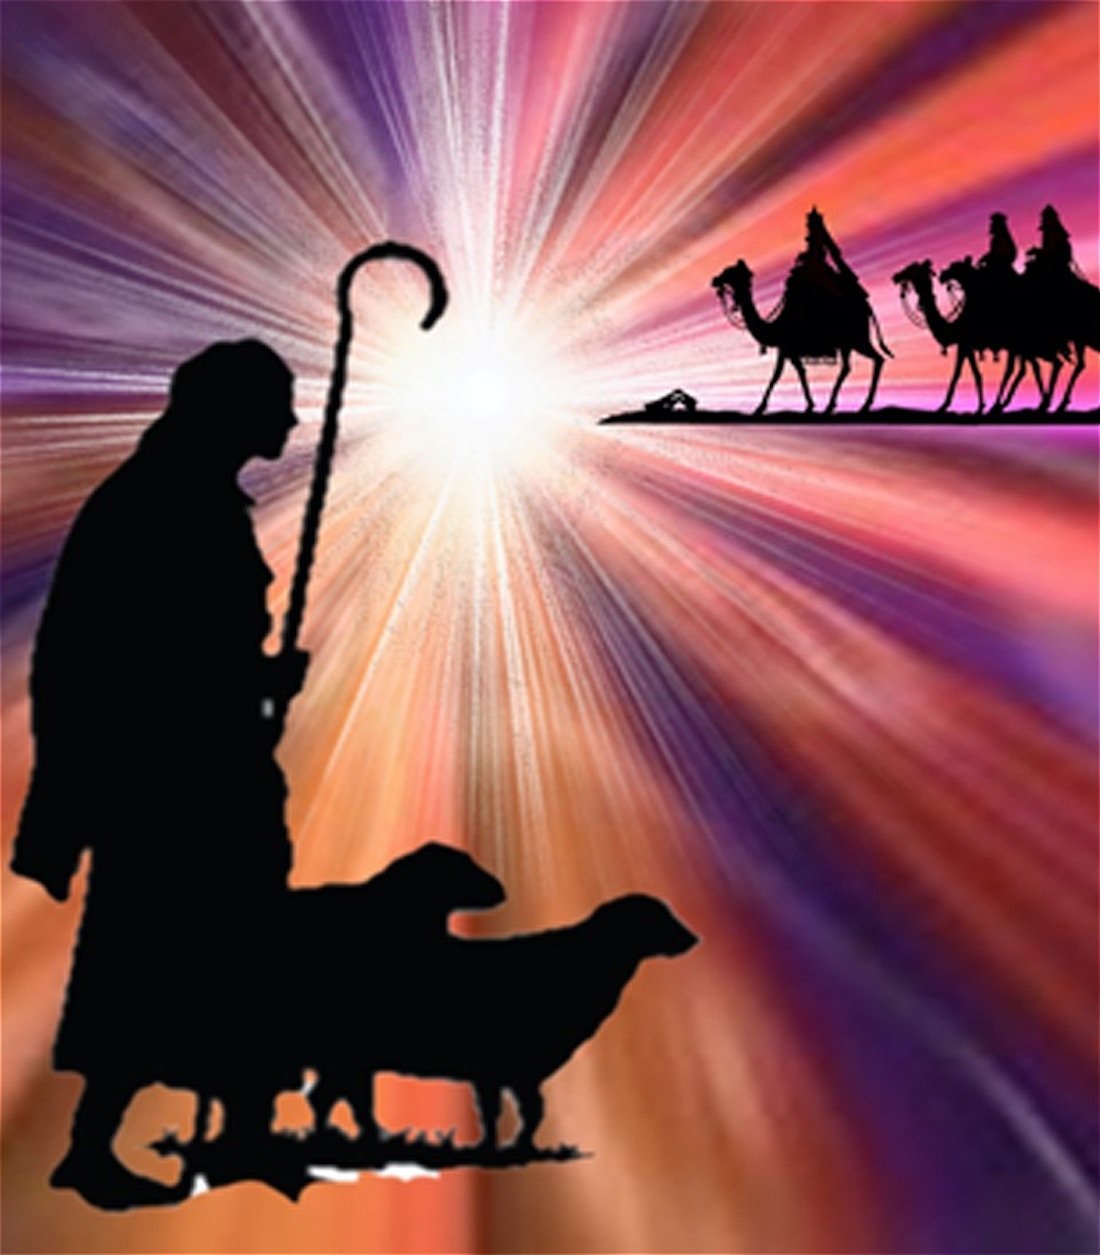 A star shines brightly in the background, illuminating all and throwing people into shadow. In the foreground, shepherd stands with two sheep. In the background, three kings ride camels.